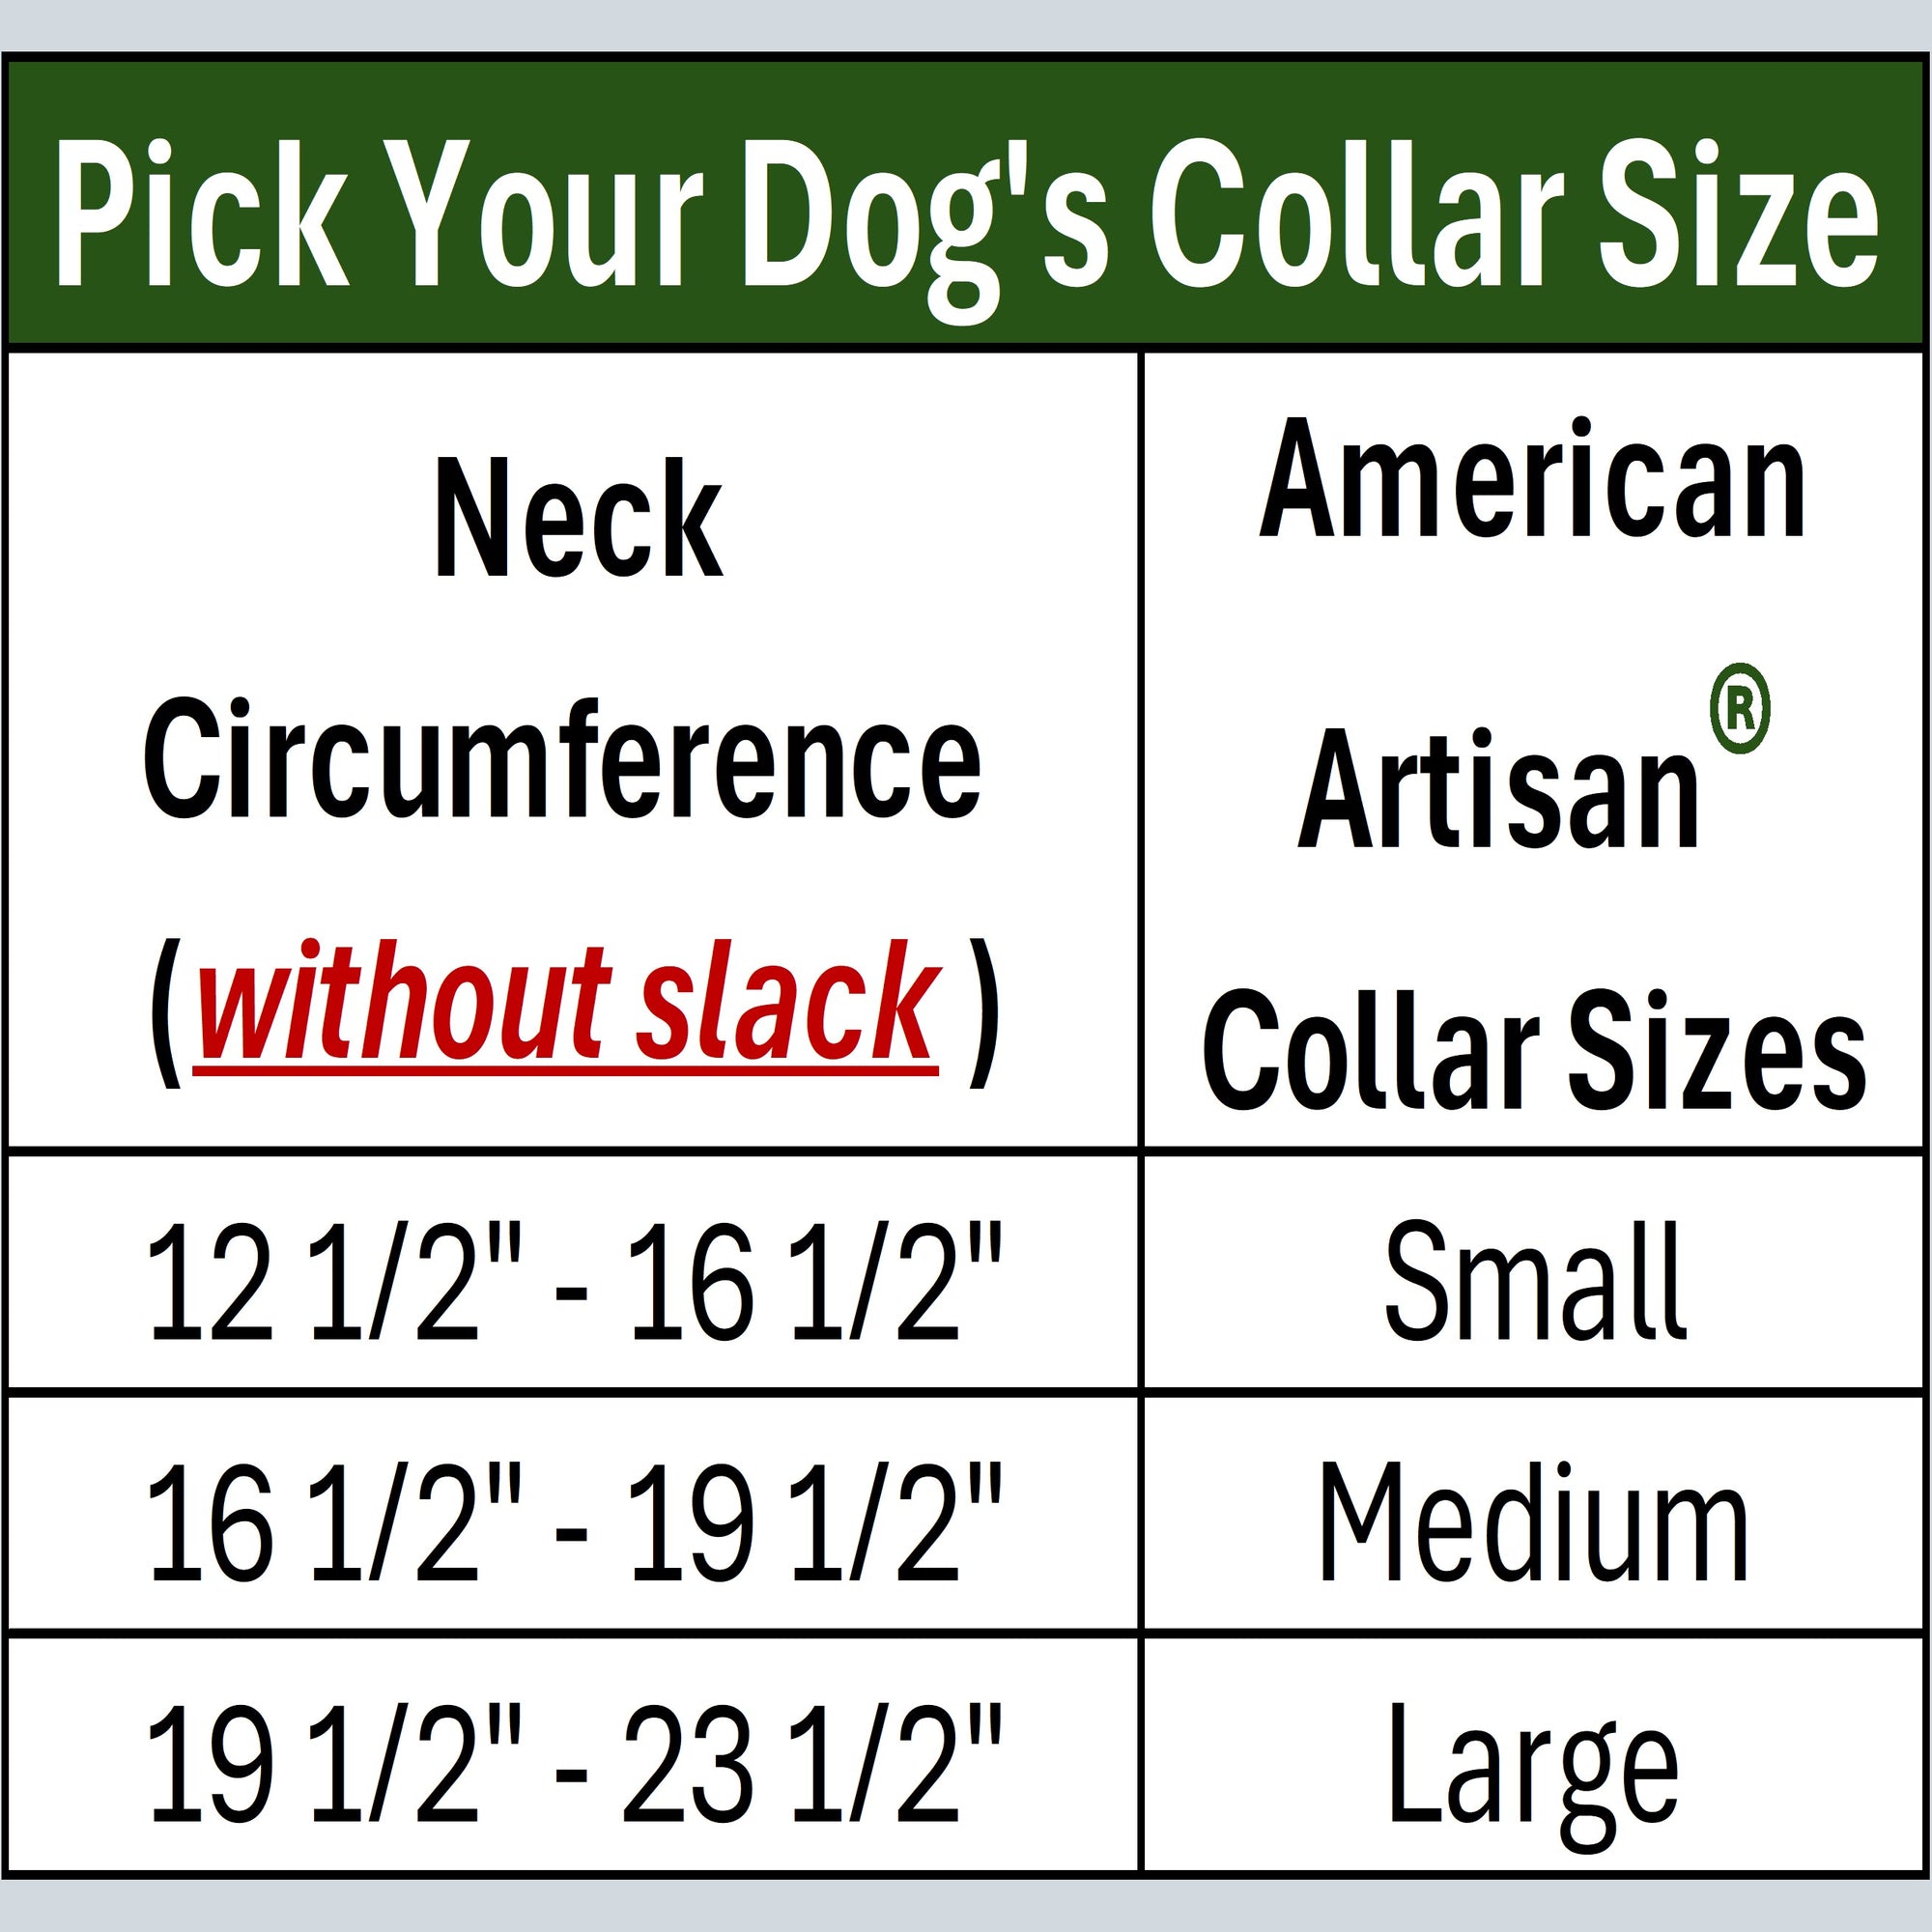 Dog collar size guide by toe beans